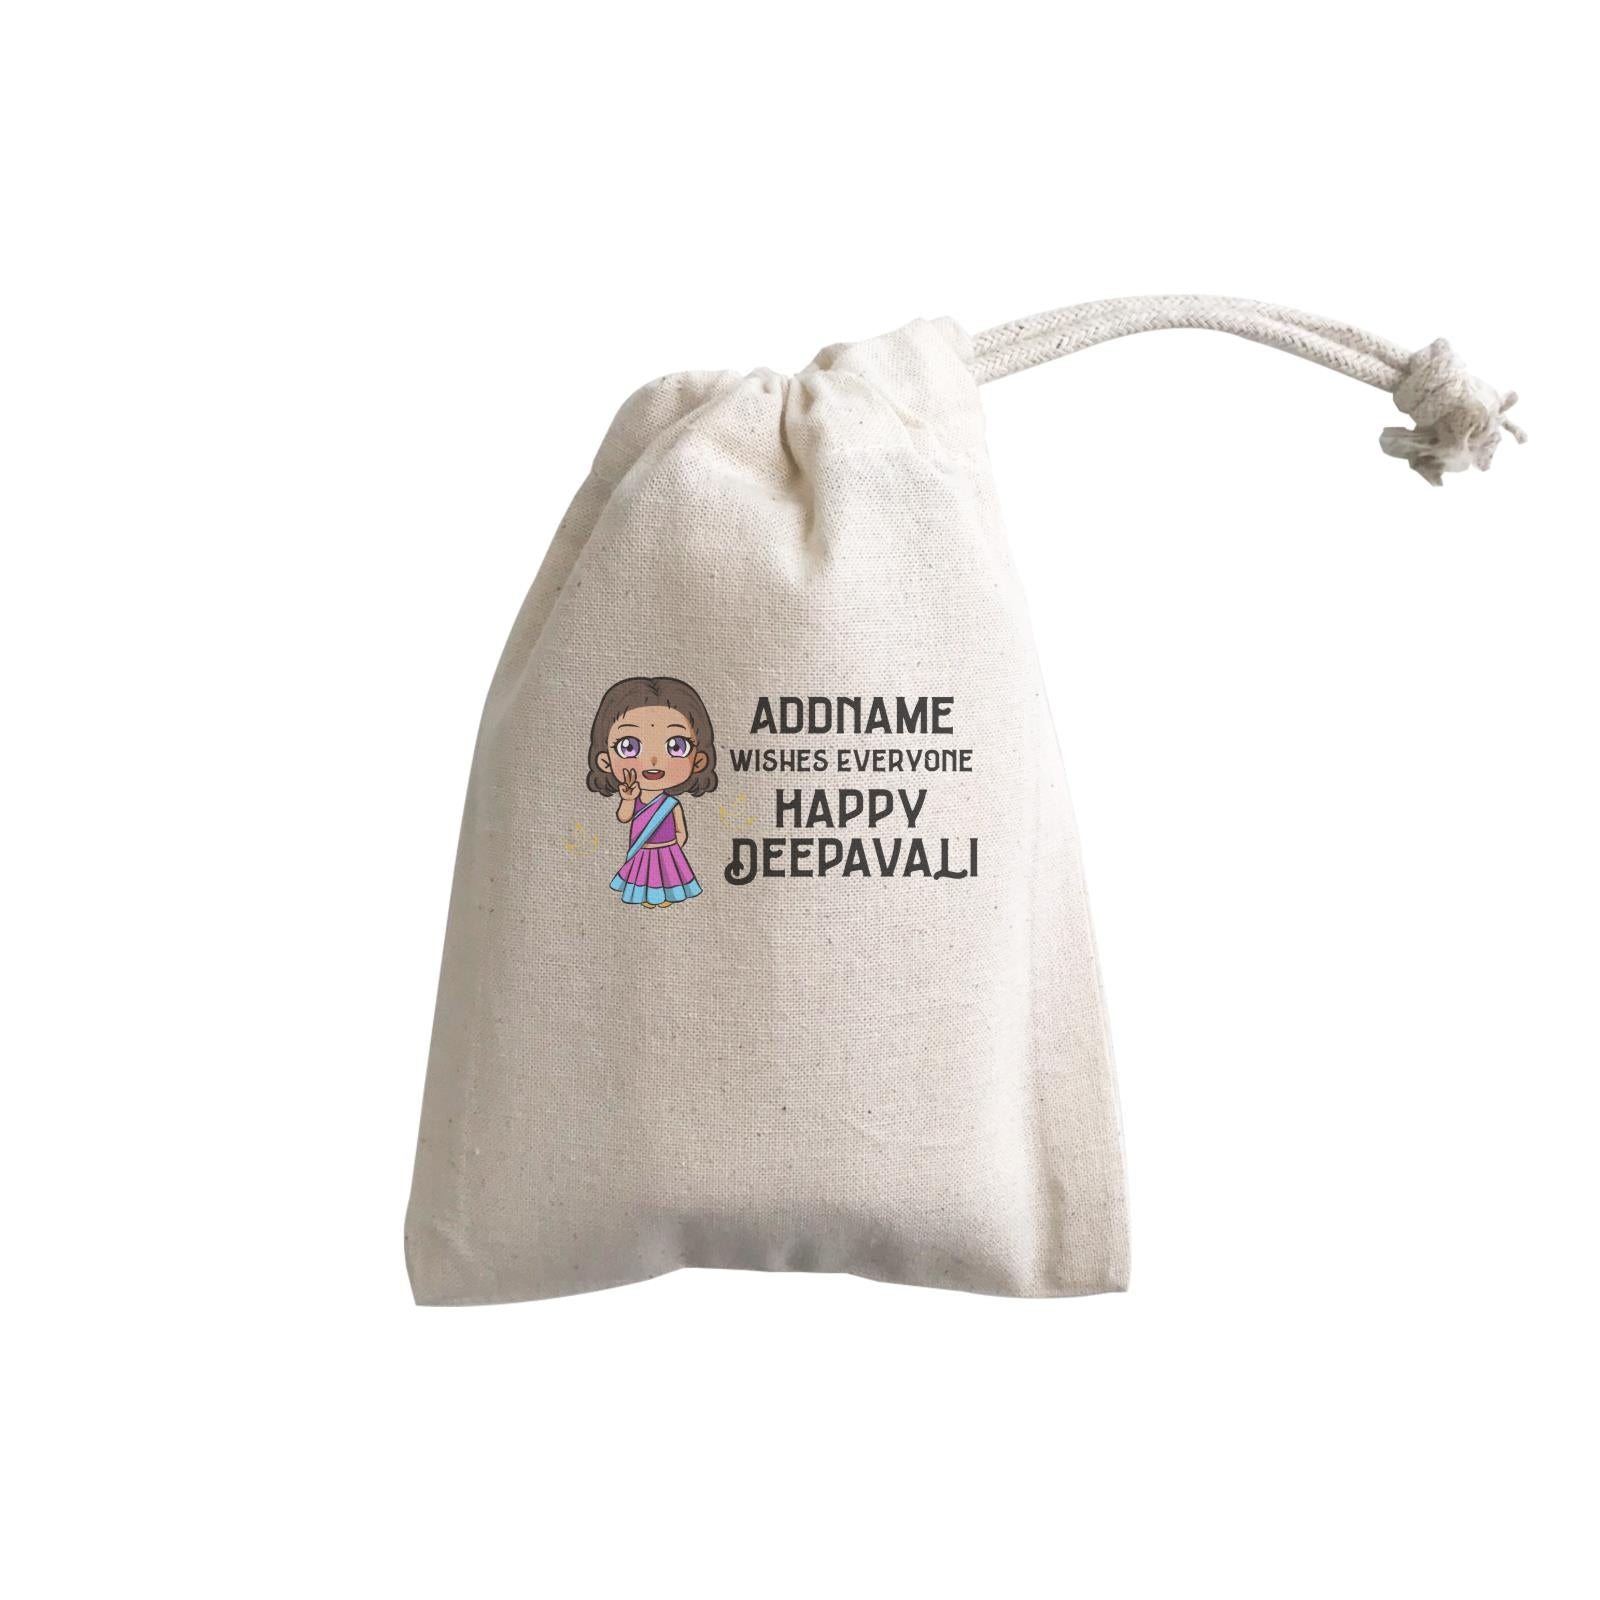 Deepavali Chibi Little Girl Front Addname Wishes Everyone Deepavali GP Gift Pouch